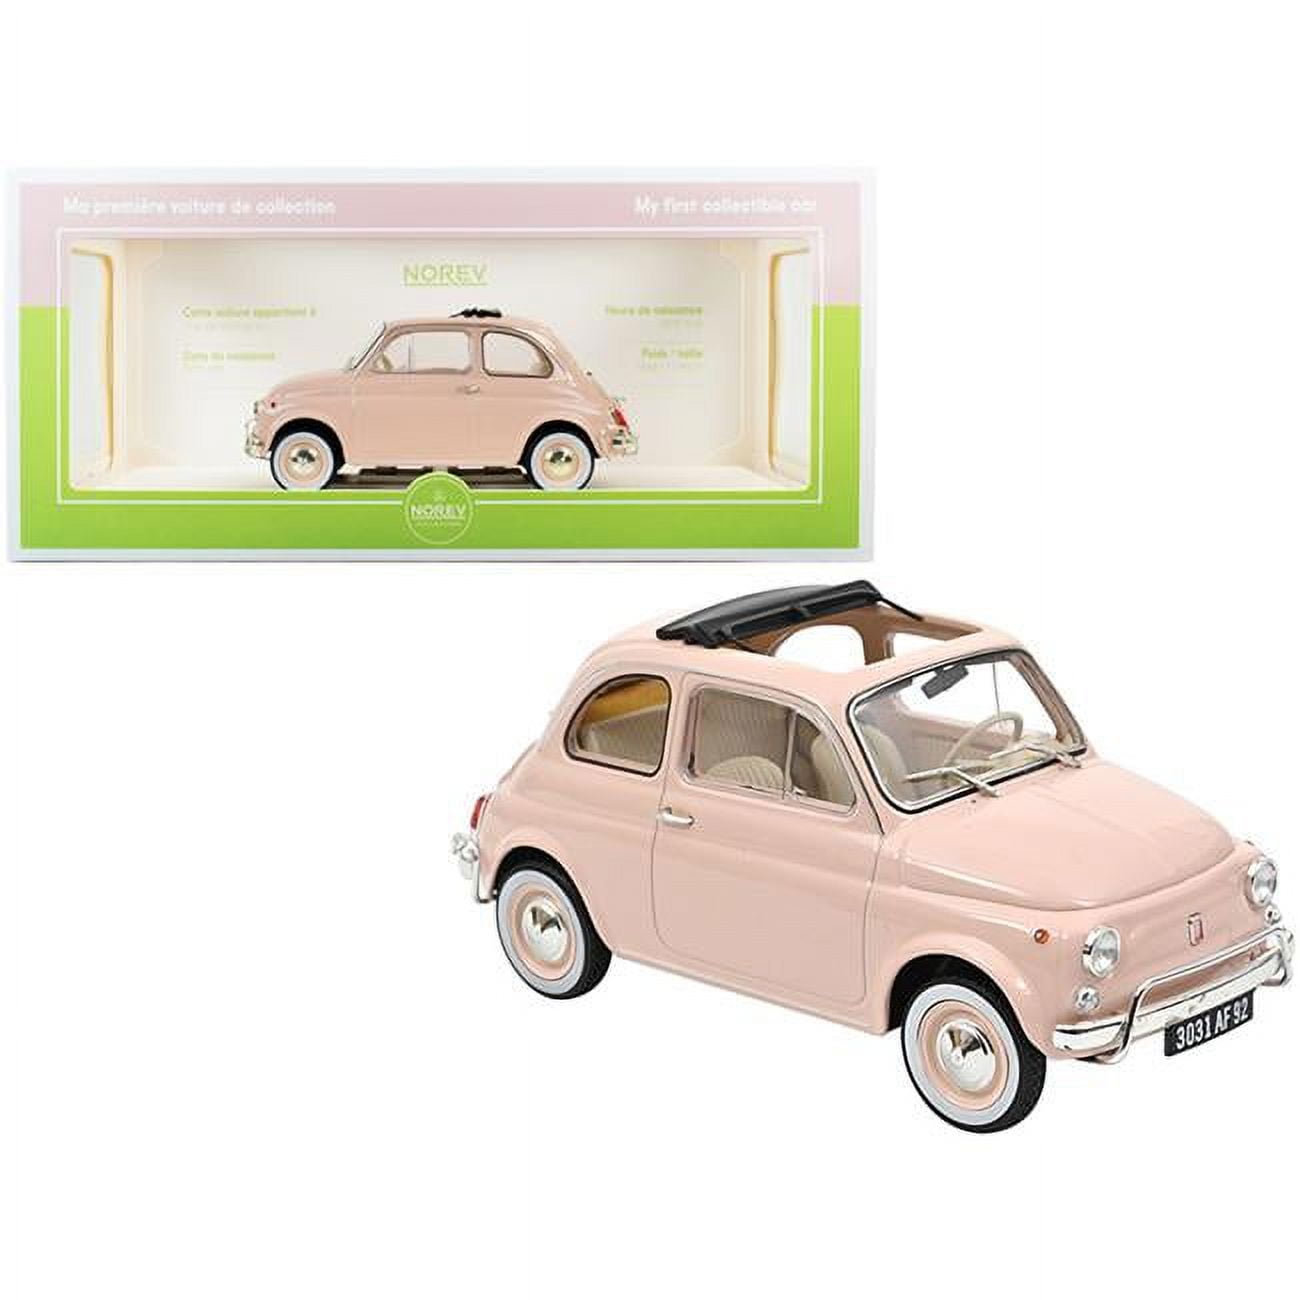 Picture of Norev 187774 1968 Fiat 500L Pink with Special BIRTH Packaging My First Collectible 1-18 Scale Diecast Model Car